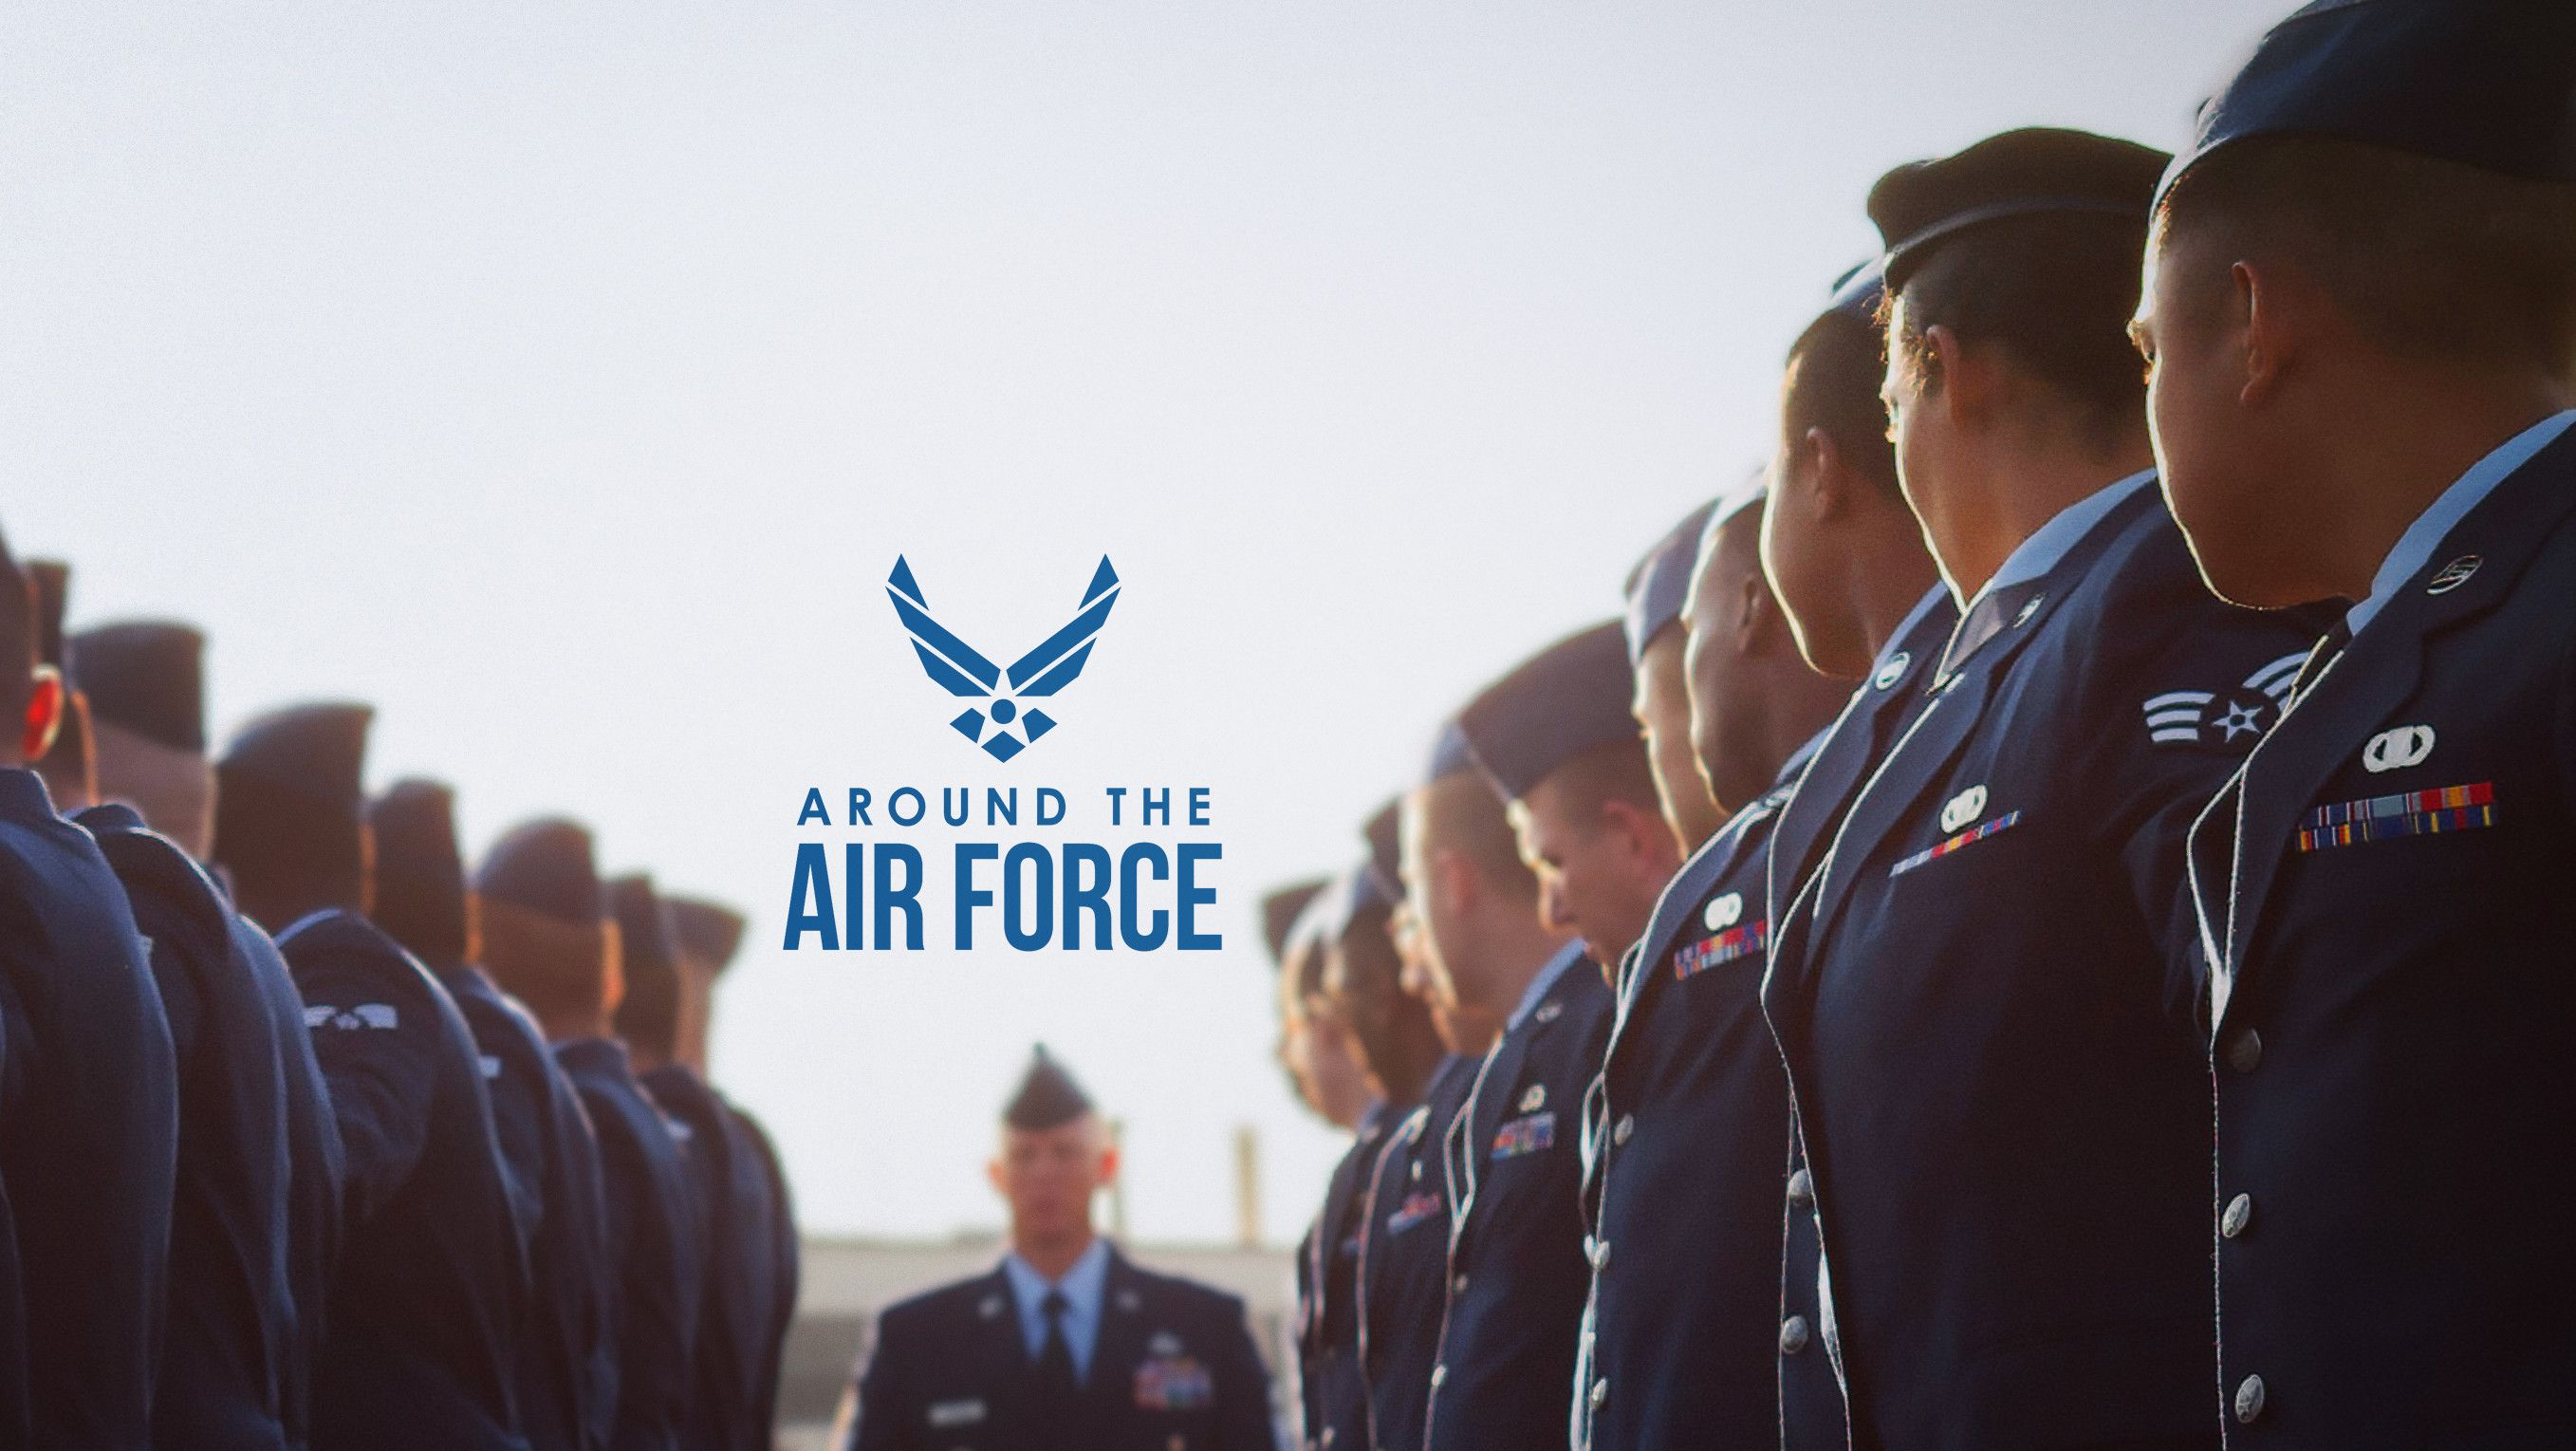 In this week’s look around the Air Force, Chief of Staff General David Allvin talks about reoptimizing the Air Force for Great Power Competition during a talk at the Brookings Institution in Washington, D.C